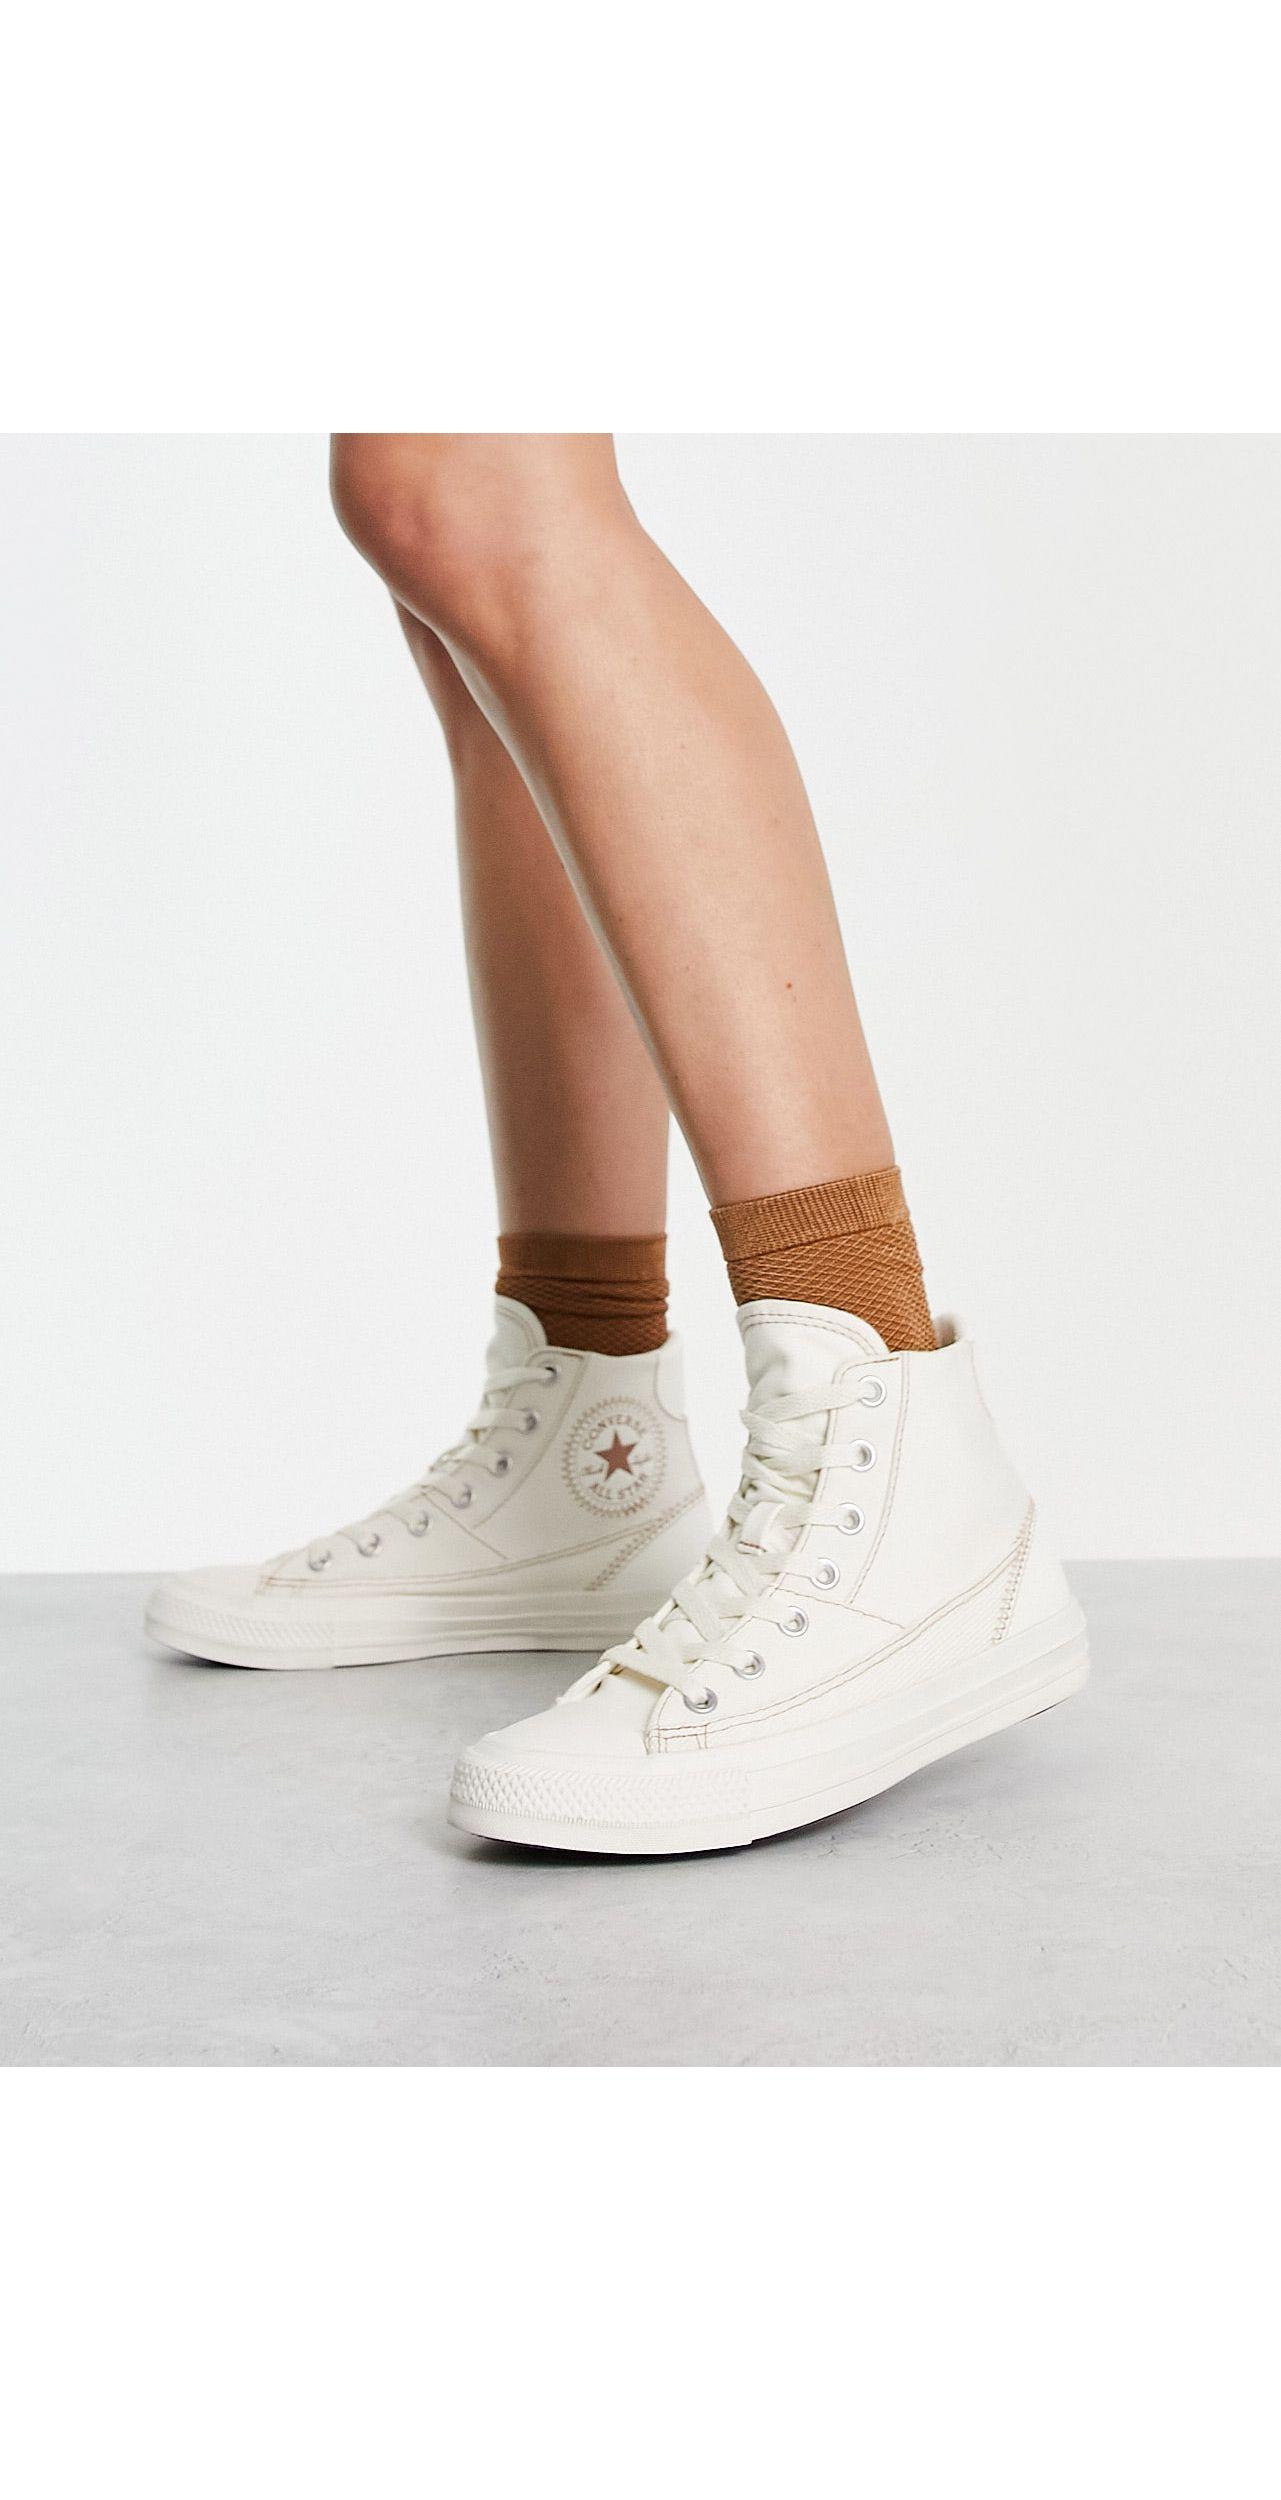 Converse Chuck Taylor All Star Hi Patchwork Sneakers in White | Lyst